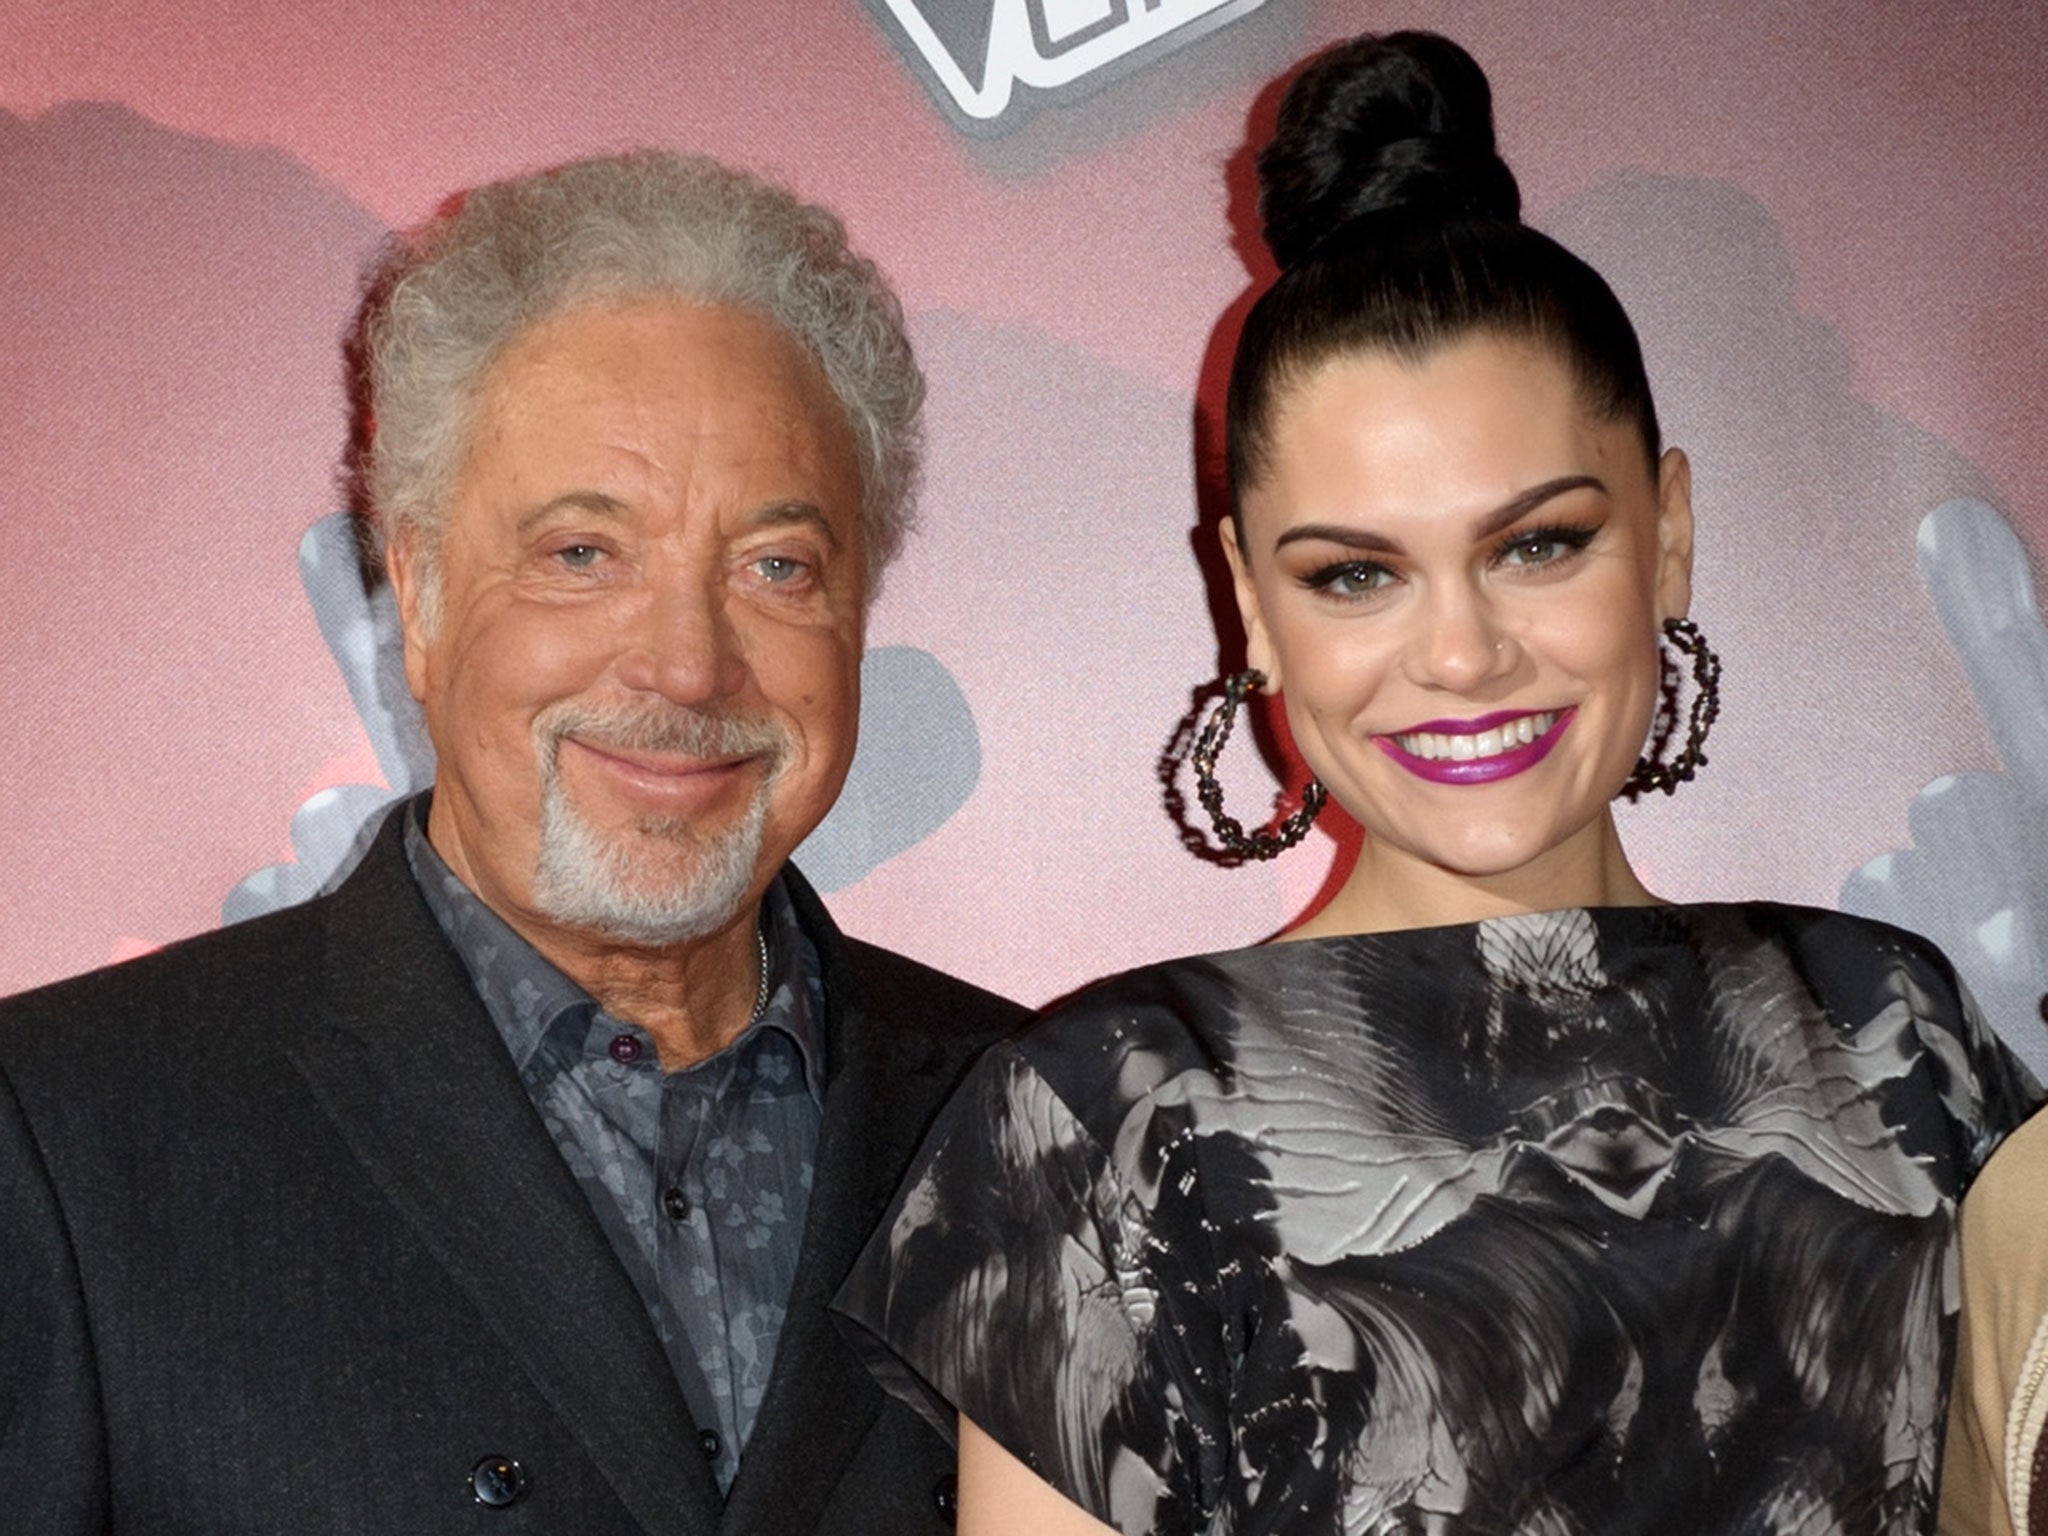 Tom Jones and Jessie J will perform together at the Grammys 2015